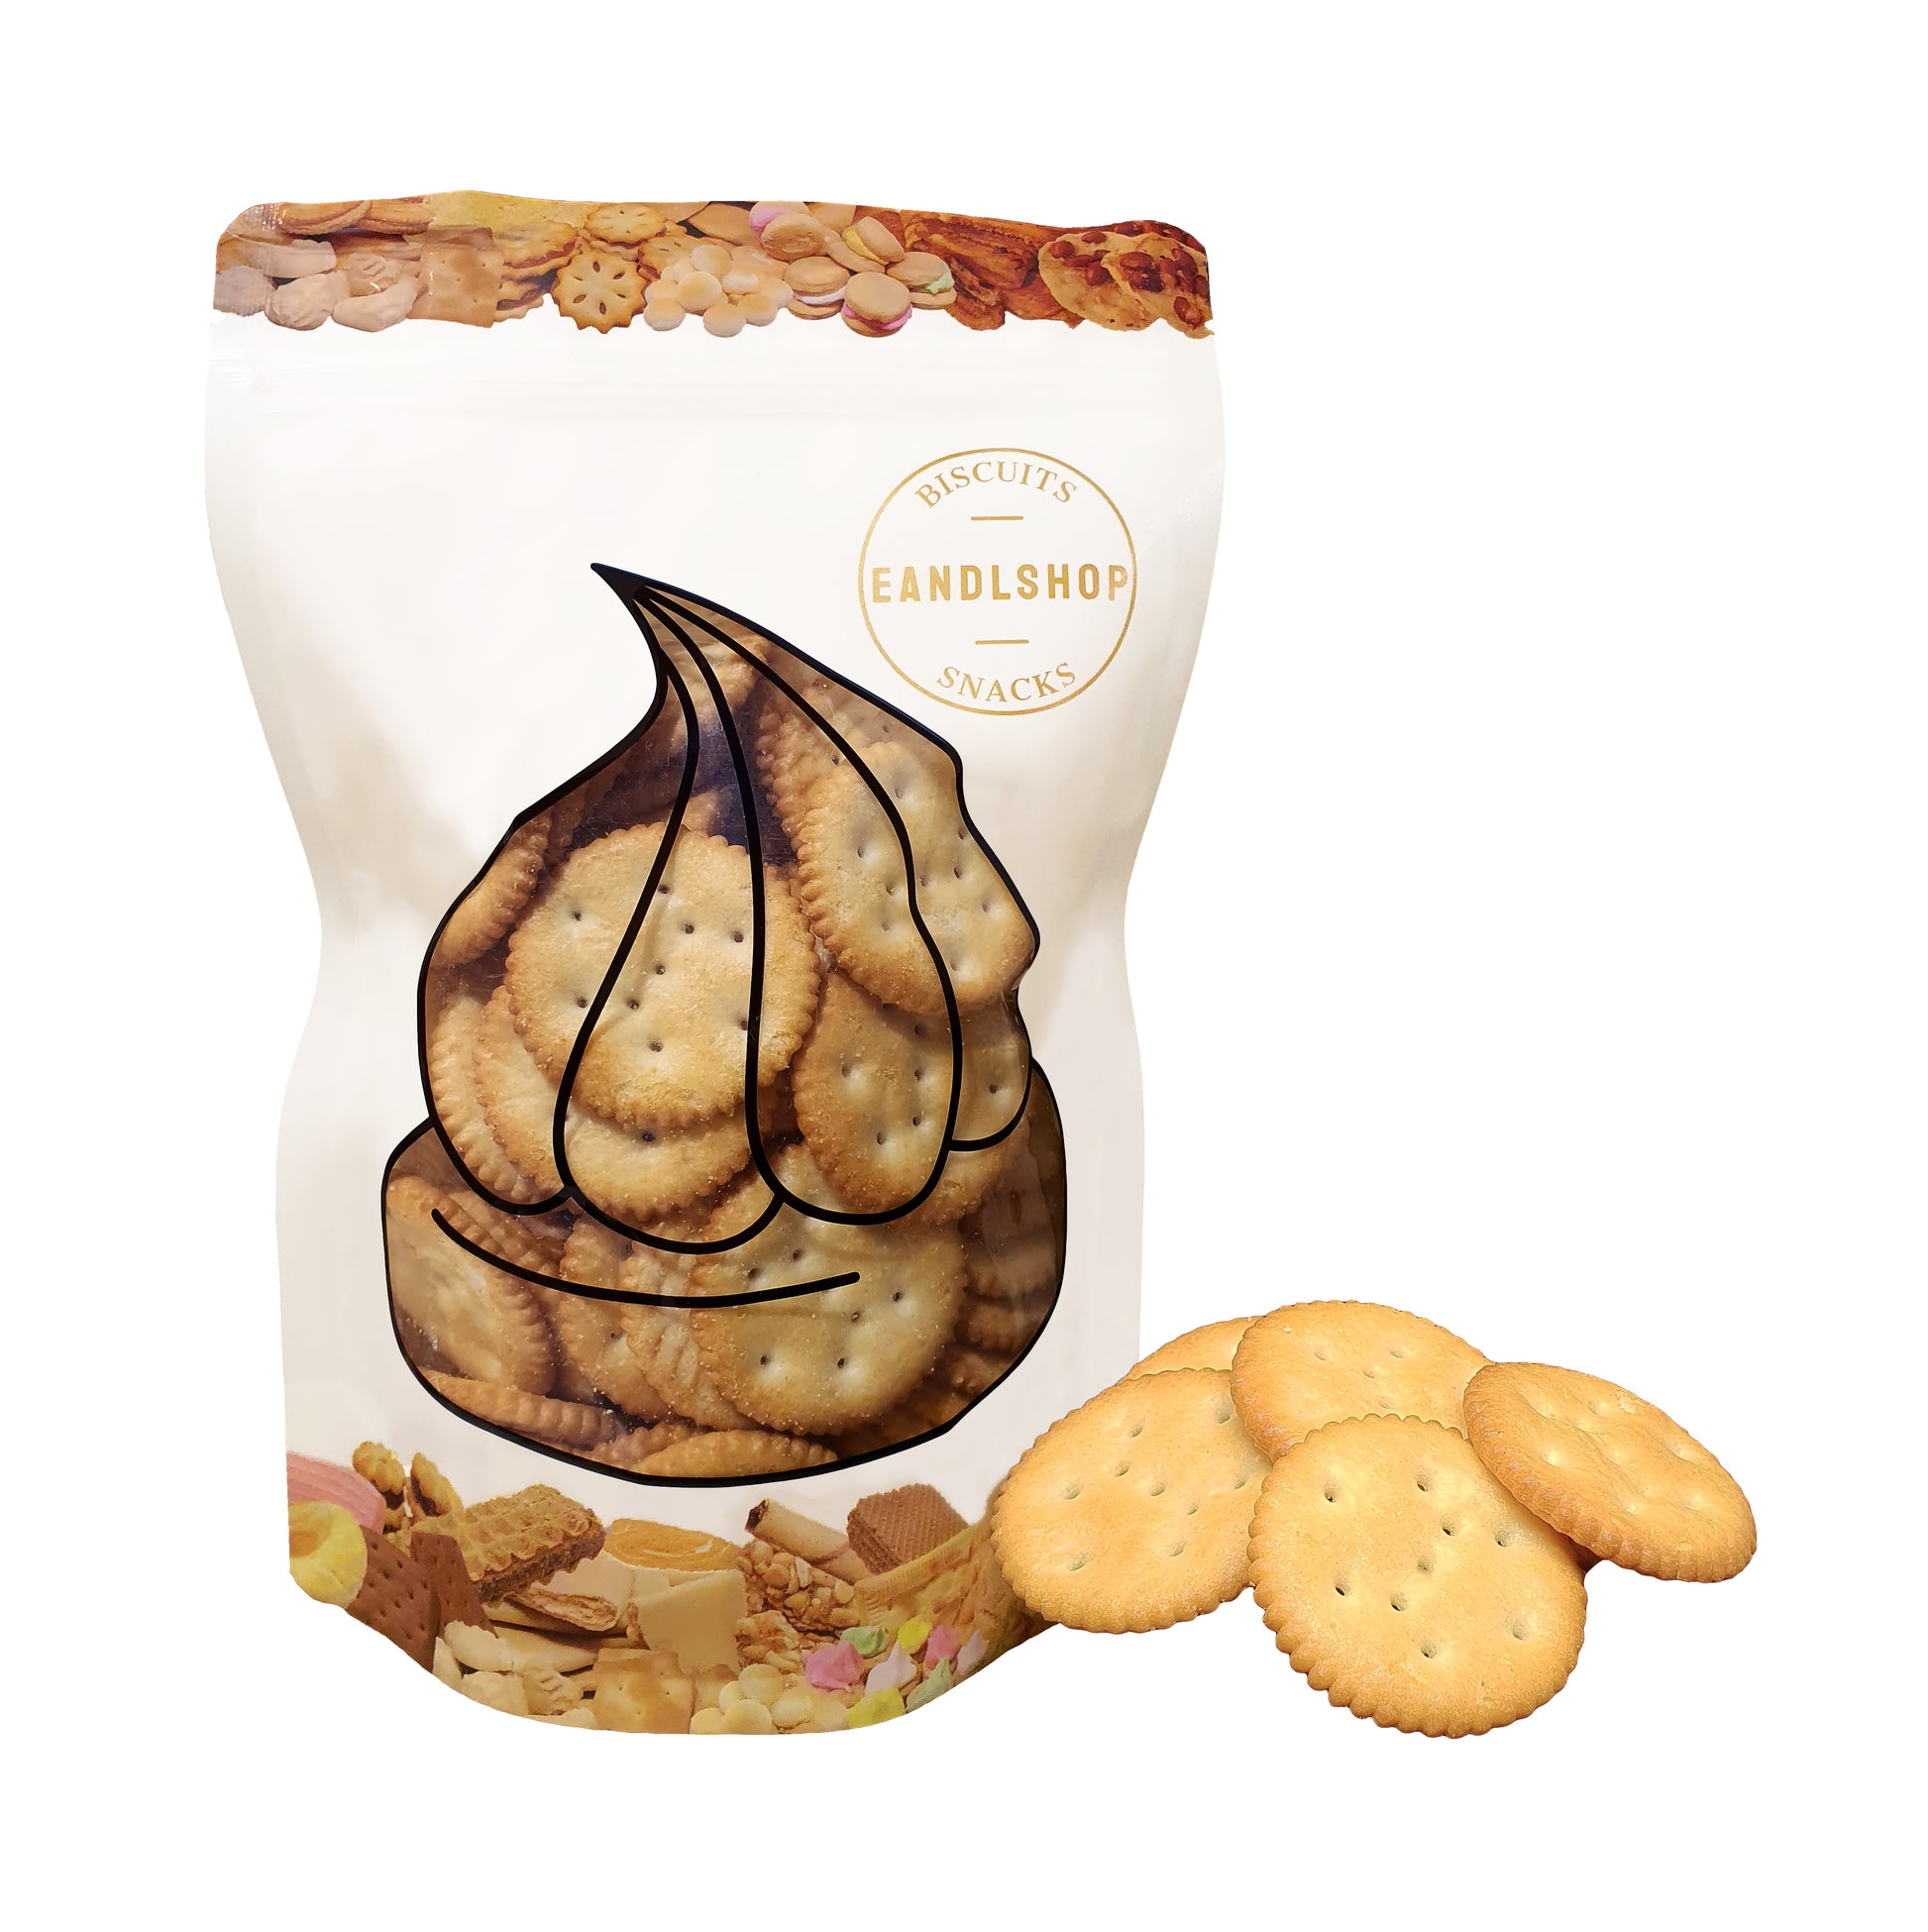 Salty Biscuit. Old-school biscuits, modern snacks (chips, crackers), cakes, gummies, plums, dried fruits, nuts, herbal tea – available at www.EANDLSHOP.com